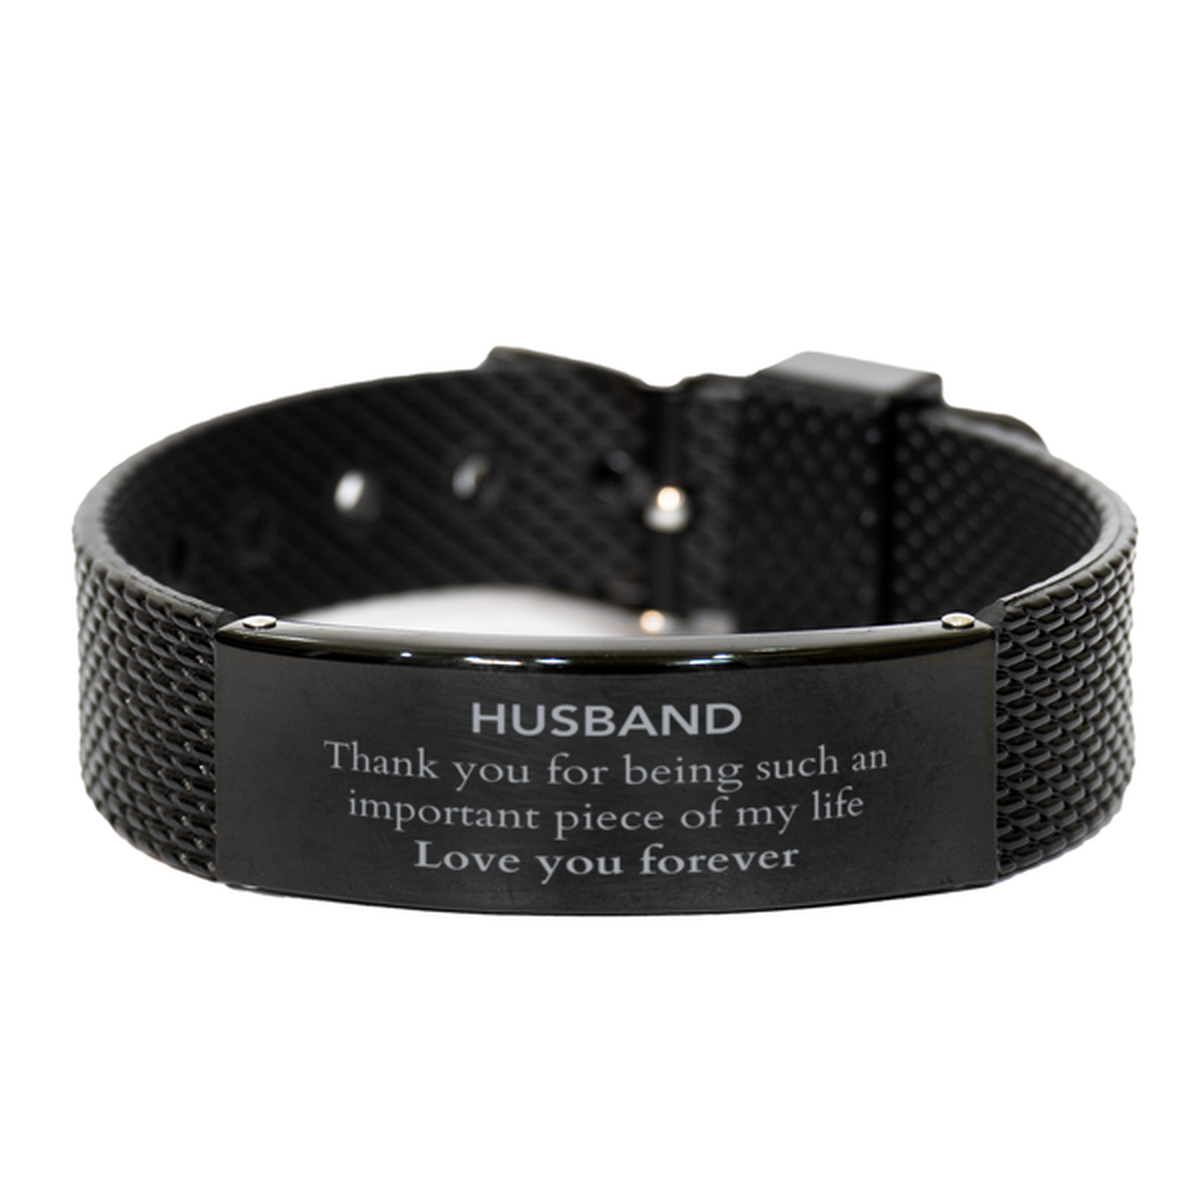 Appropriate Husband Black Shark Mesh Bracelet Epic Birthday Gifts for Husband Thank you for being such an important piece of my life Husband Christmas Mothers Fathers Day